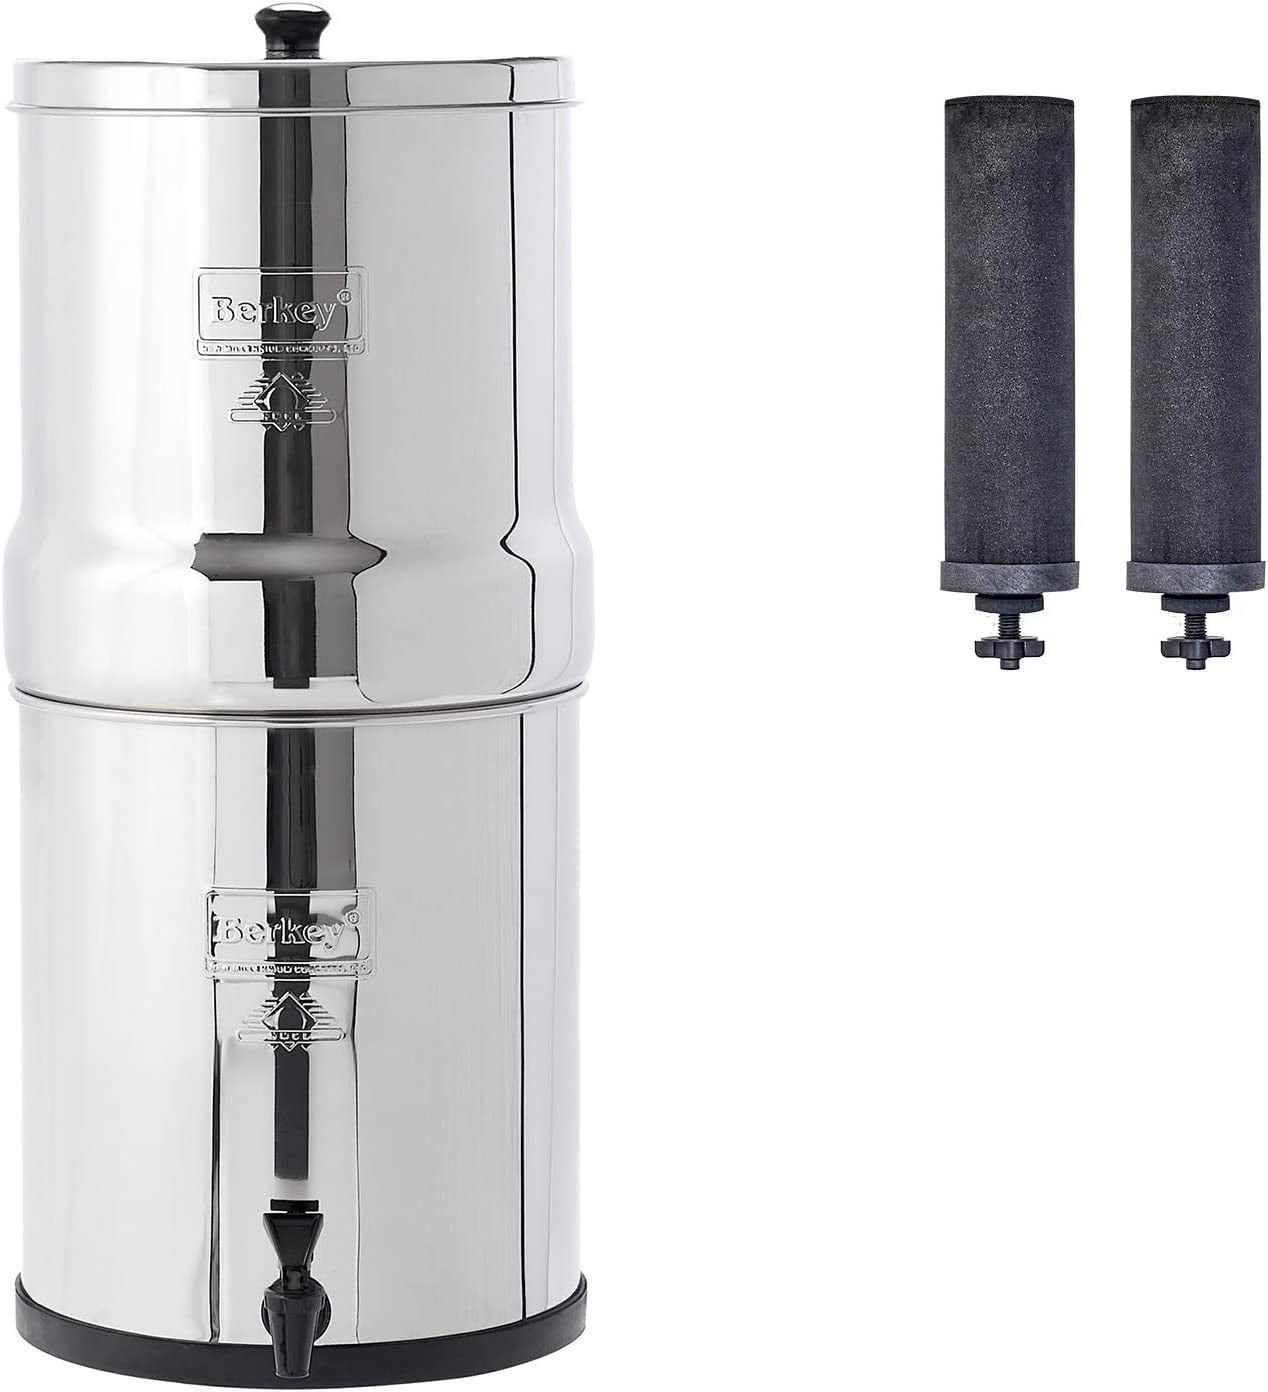 Big Berkey Water Filtration System with 2 Black Filters 